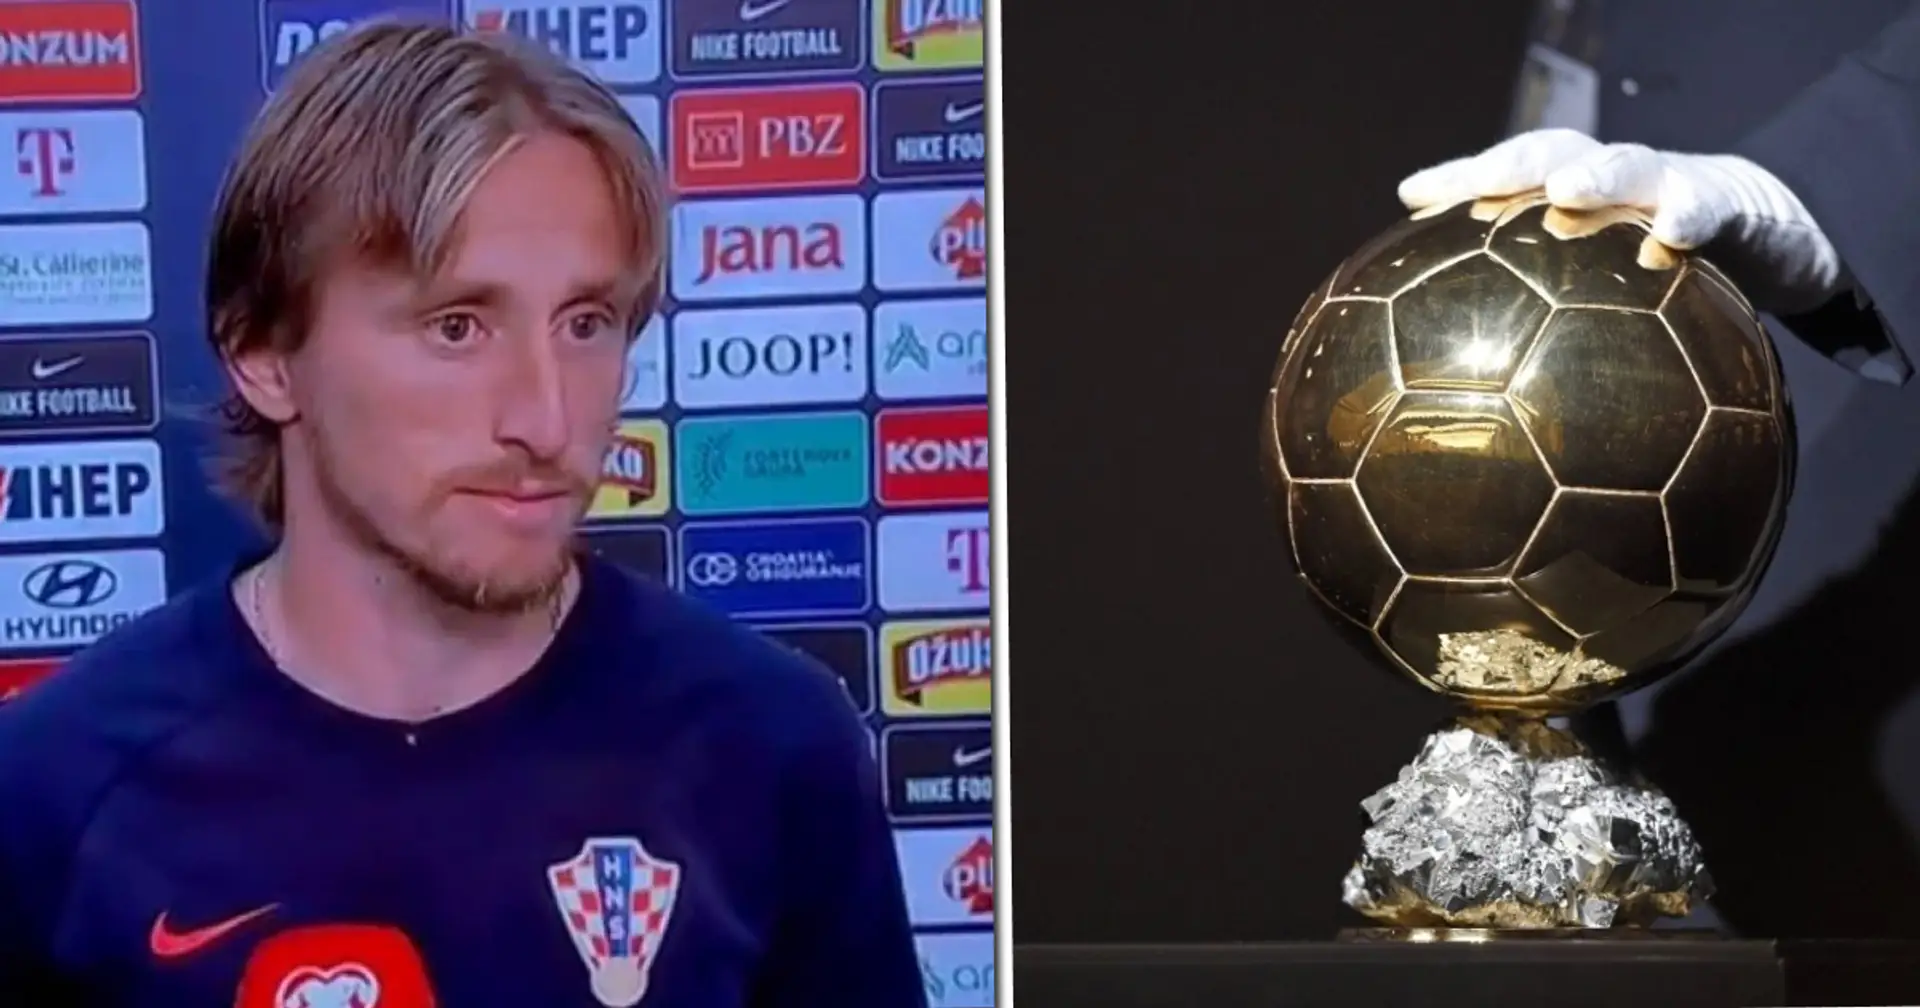 Luka Modric makes Ballon d'Or claim, mentions teammate who deserves to be on shortlist